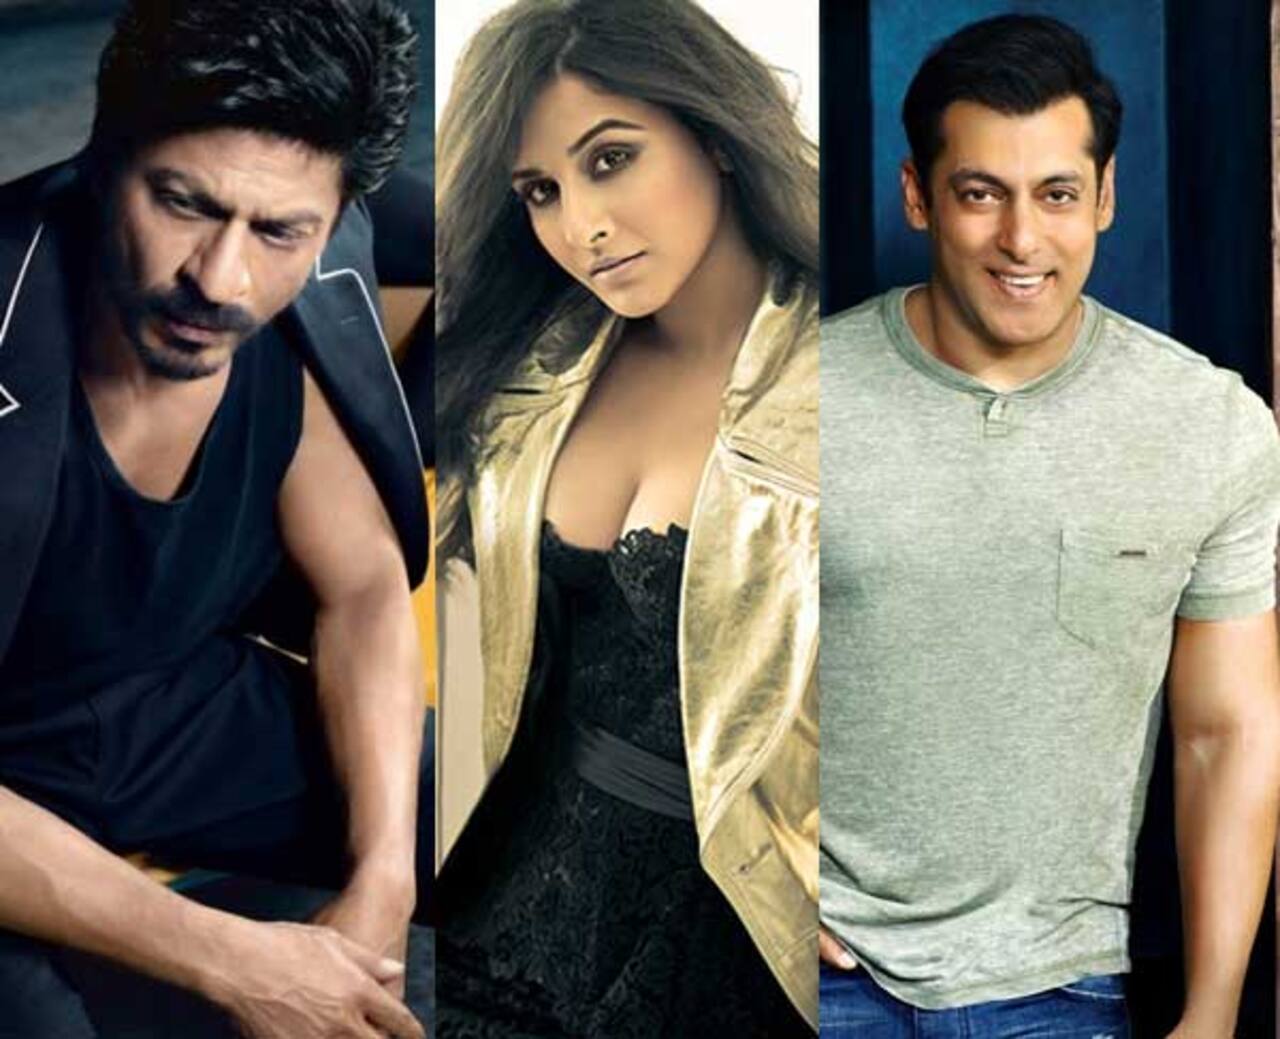 What does Vidya Balan have to say about working with Shah Rukh Khan and Salman Khan?